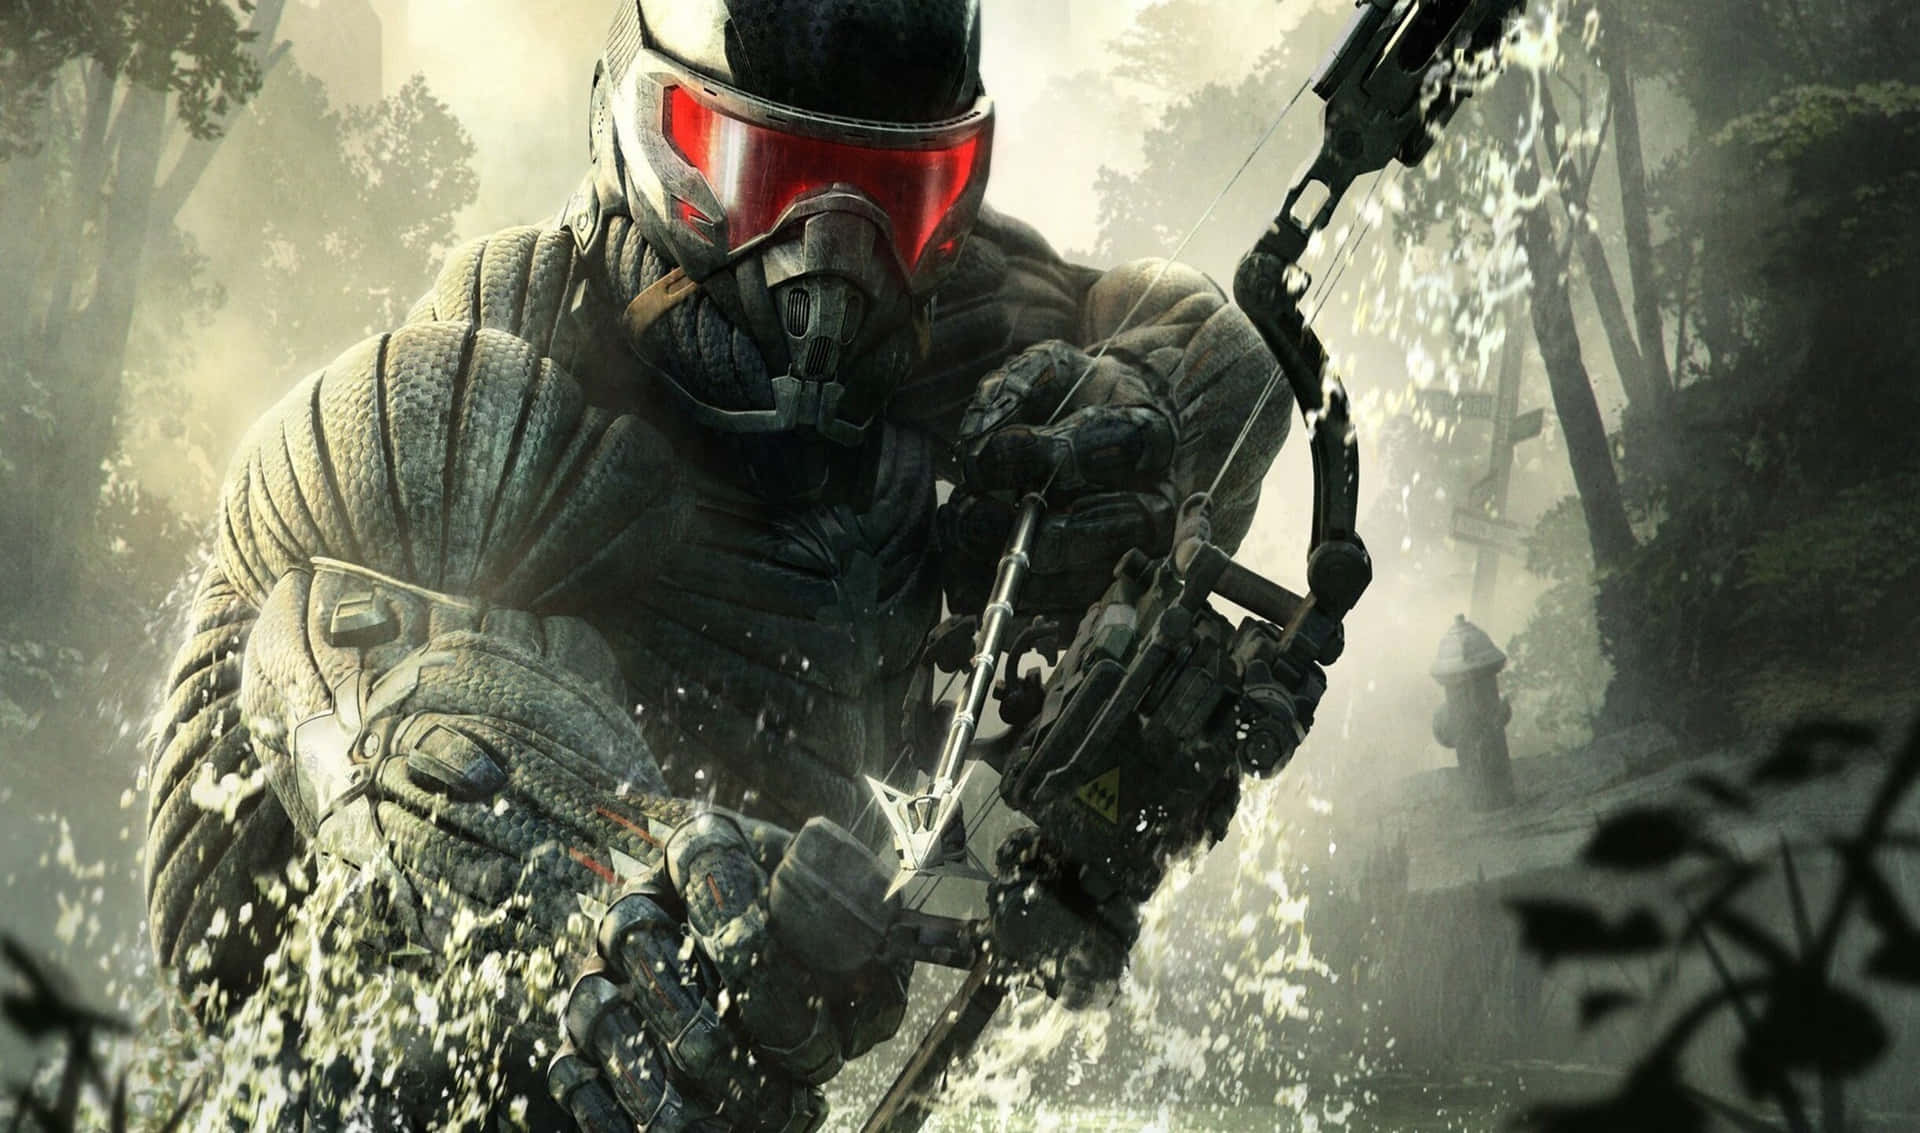 Crysis 3 in All Its High-Res Glory